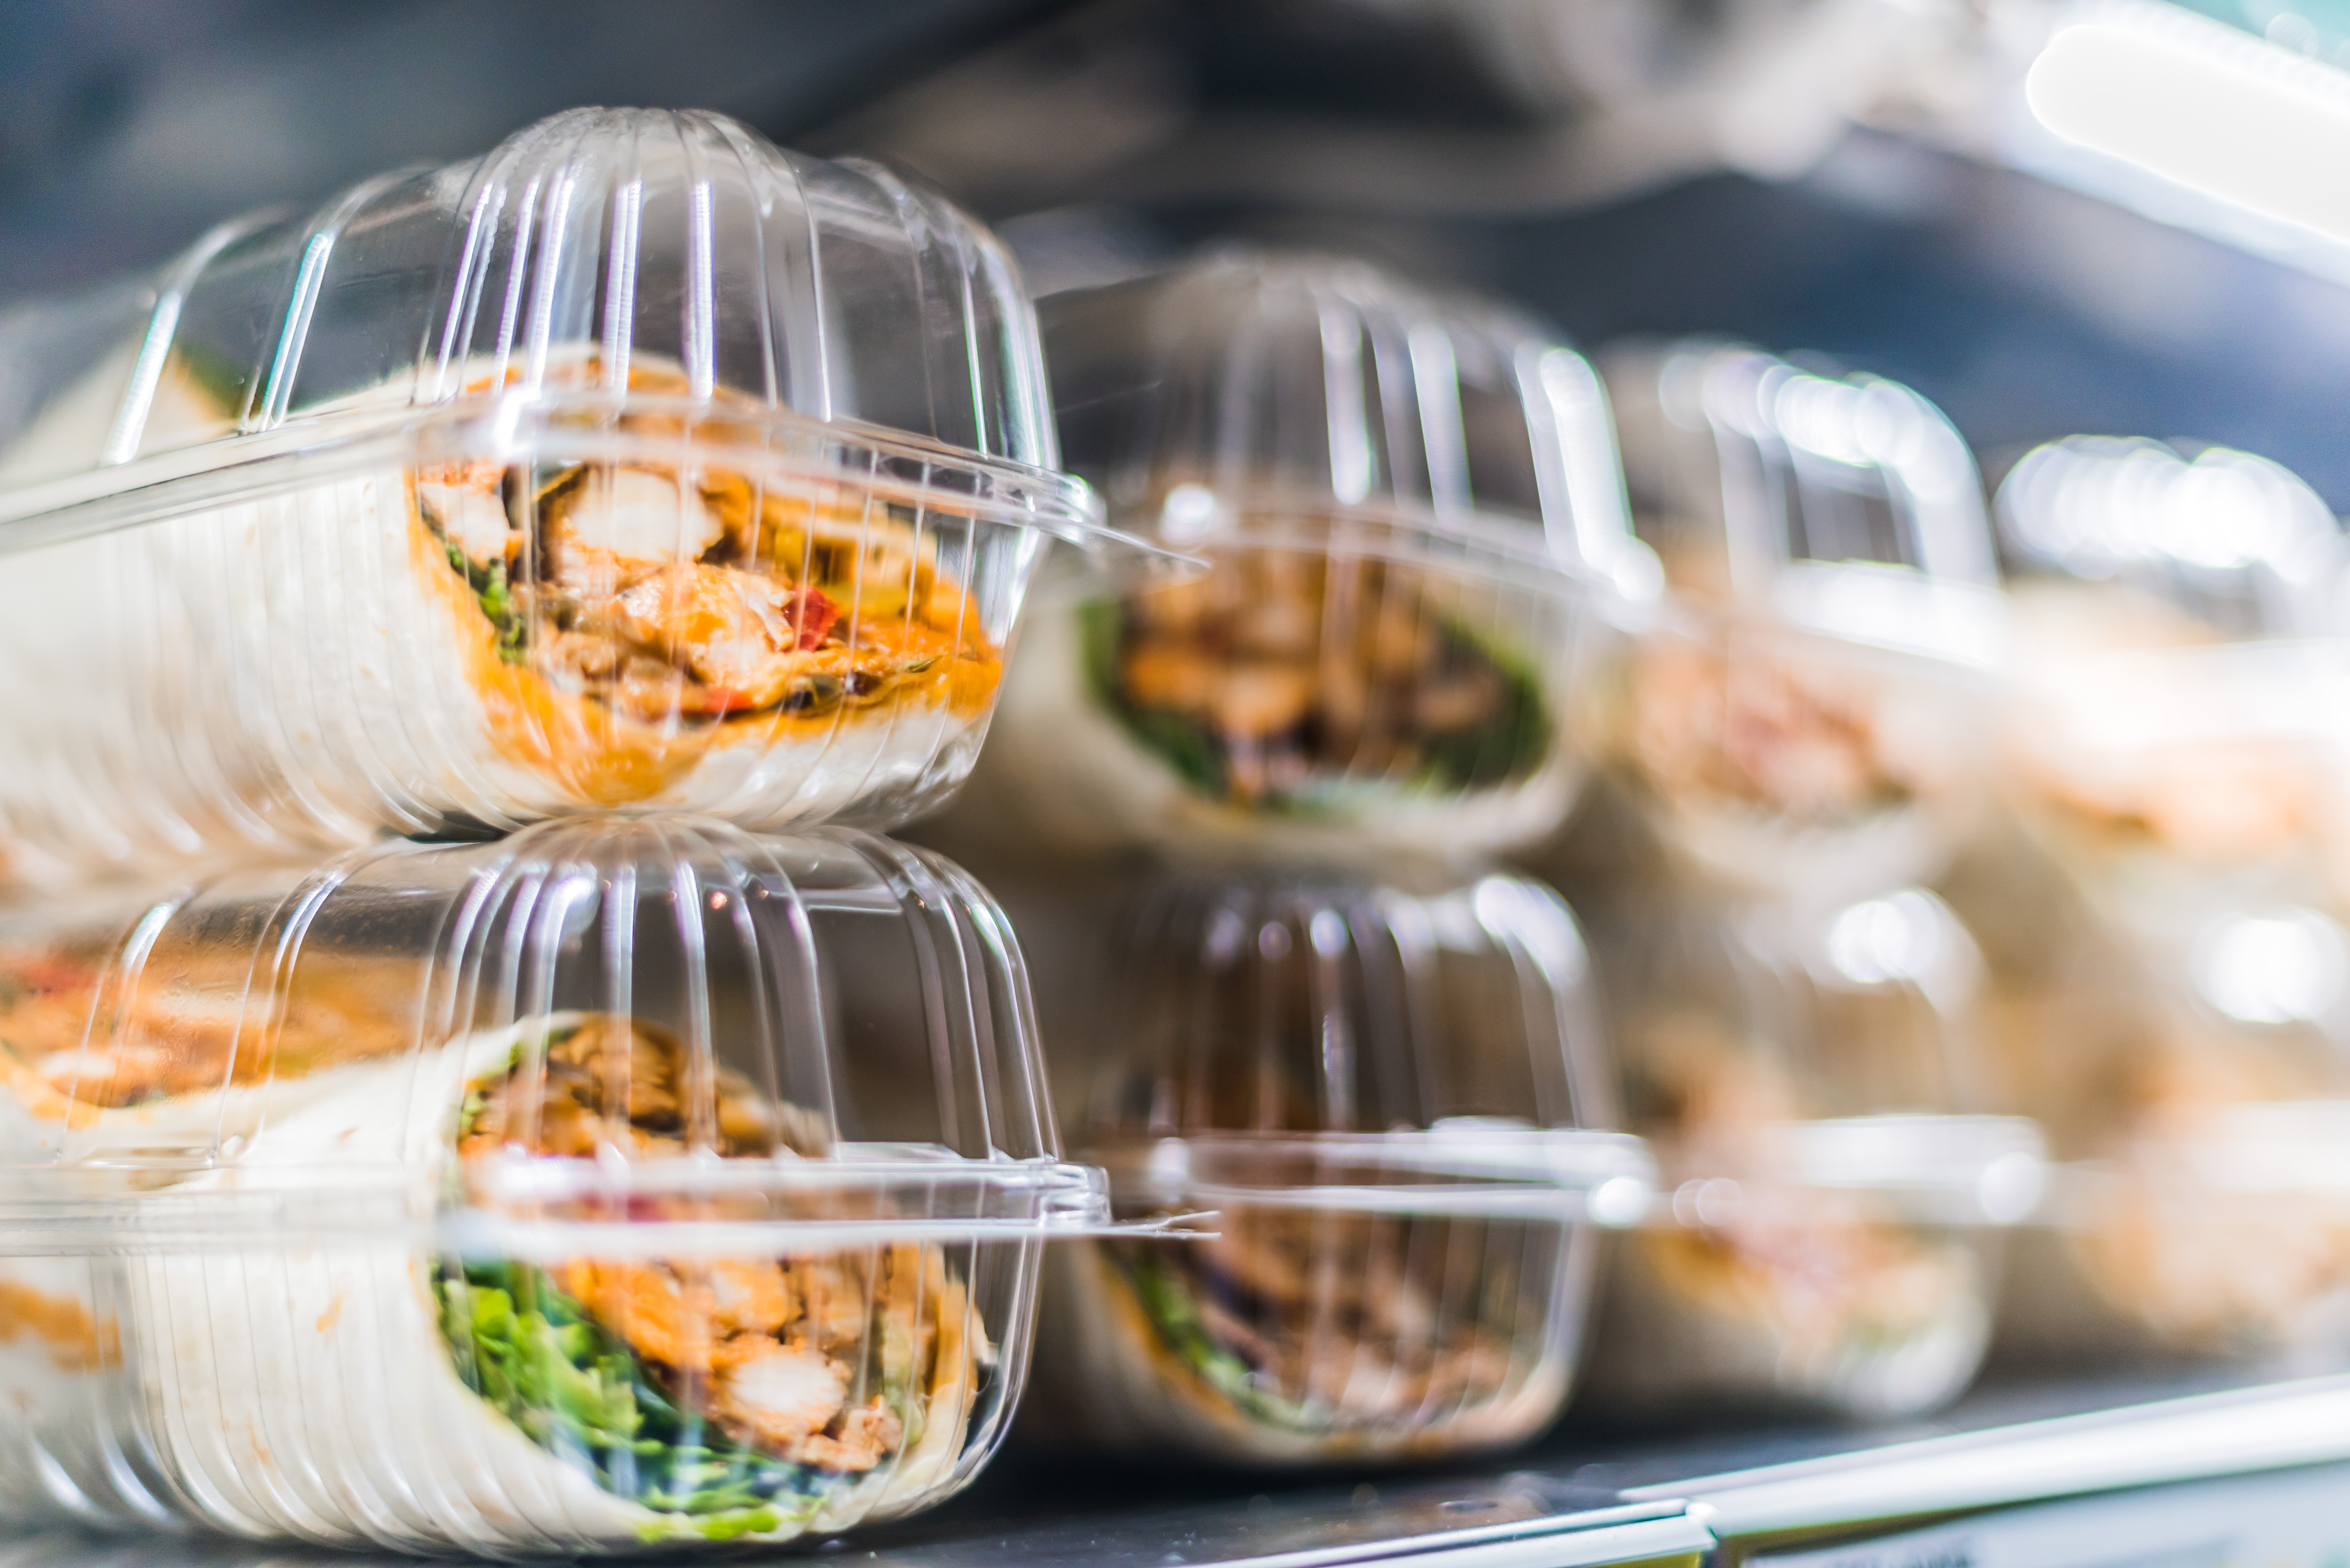 Plastic Packaging Tax: Understanding the impact on food safety